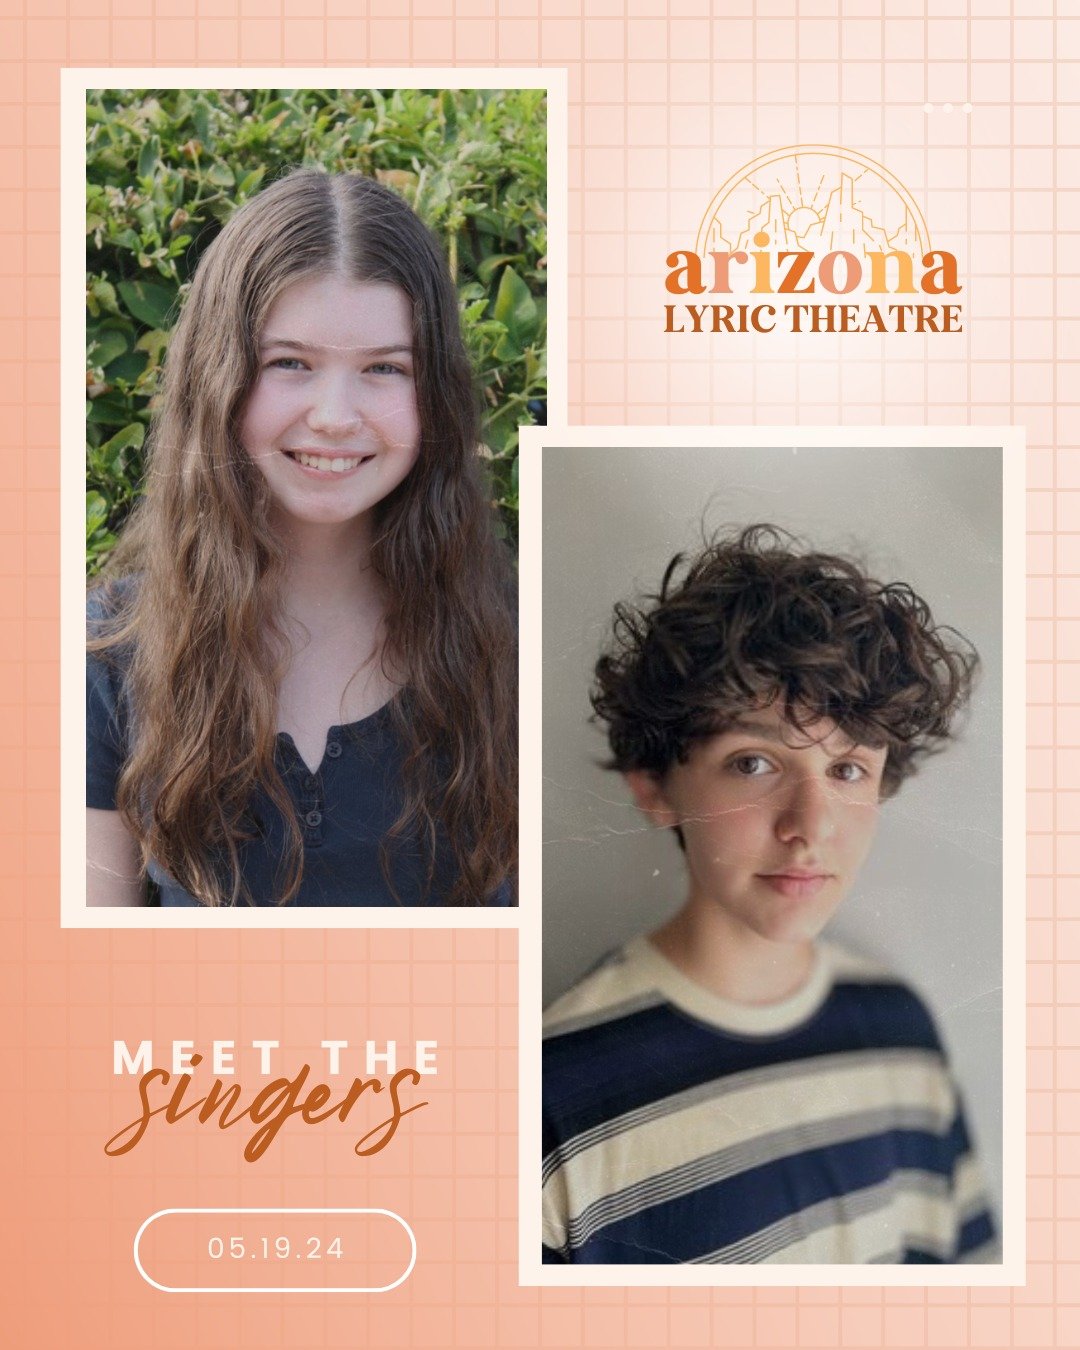 MEET THE SINGERS! We are THRILLED to have Bailey Hodgins and Finn Allard sing with us this weekend!!

🎶 Join us for an unforgettable evening featuring the incredible talents of two exceptional teen singers! 🌟 Get ready to be mesmerized by their voi